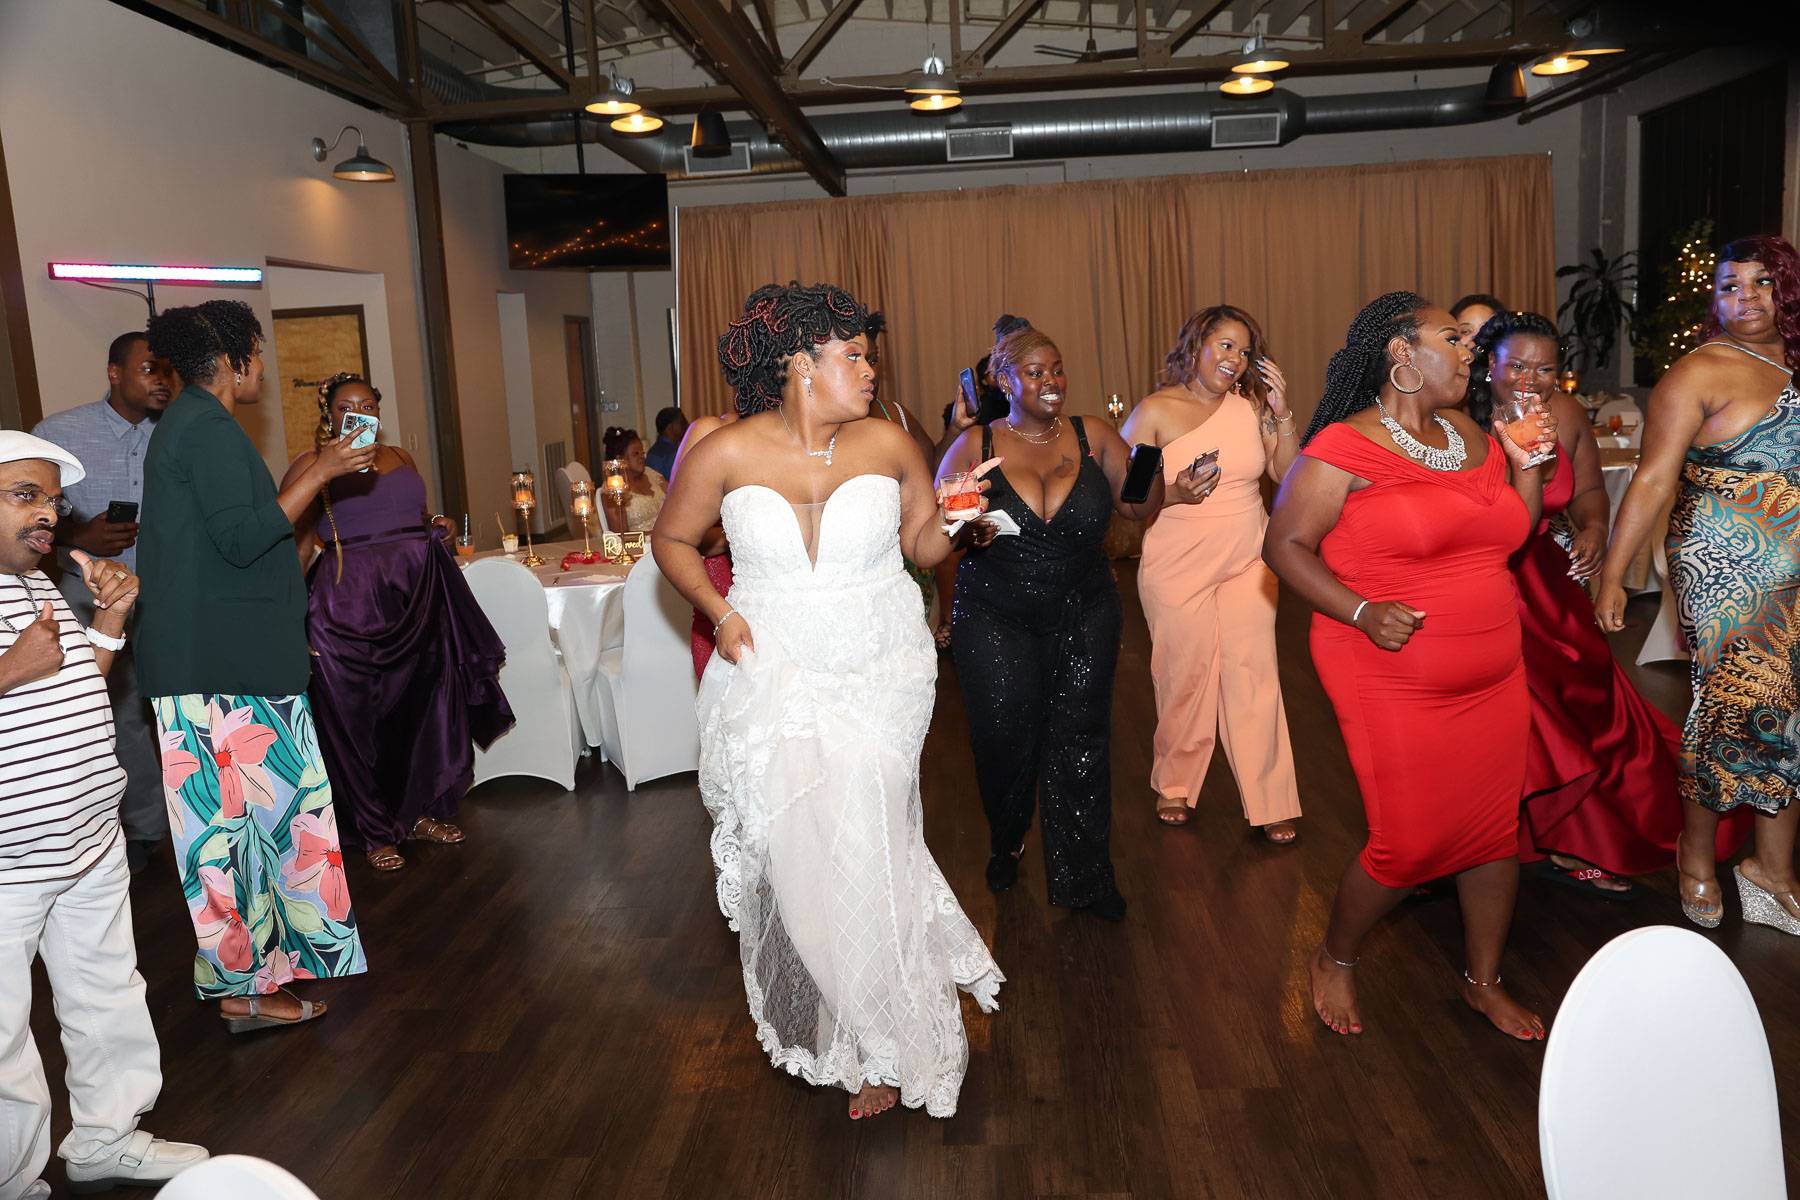 The bride and guests dancing in unison